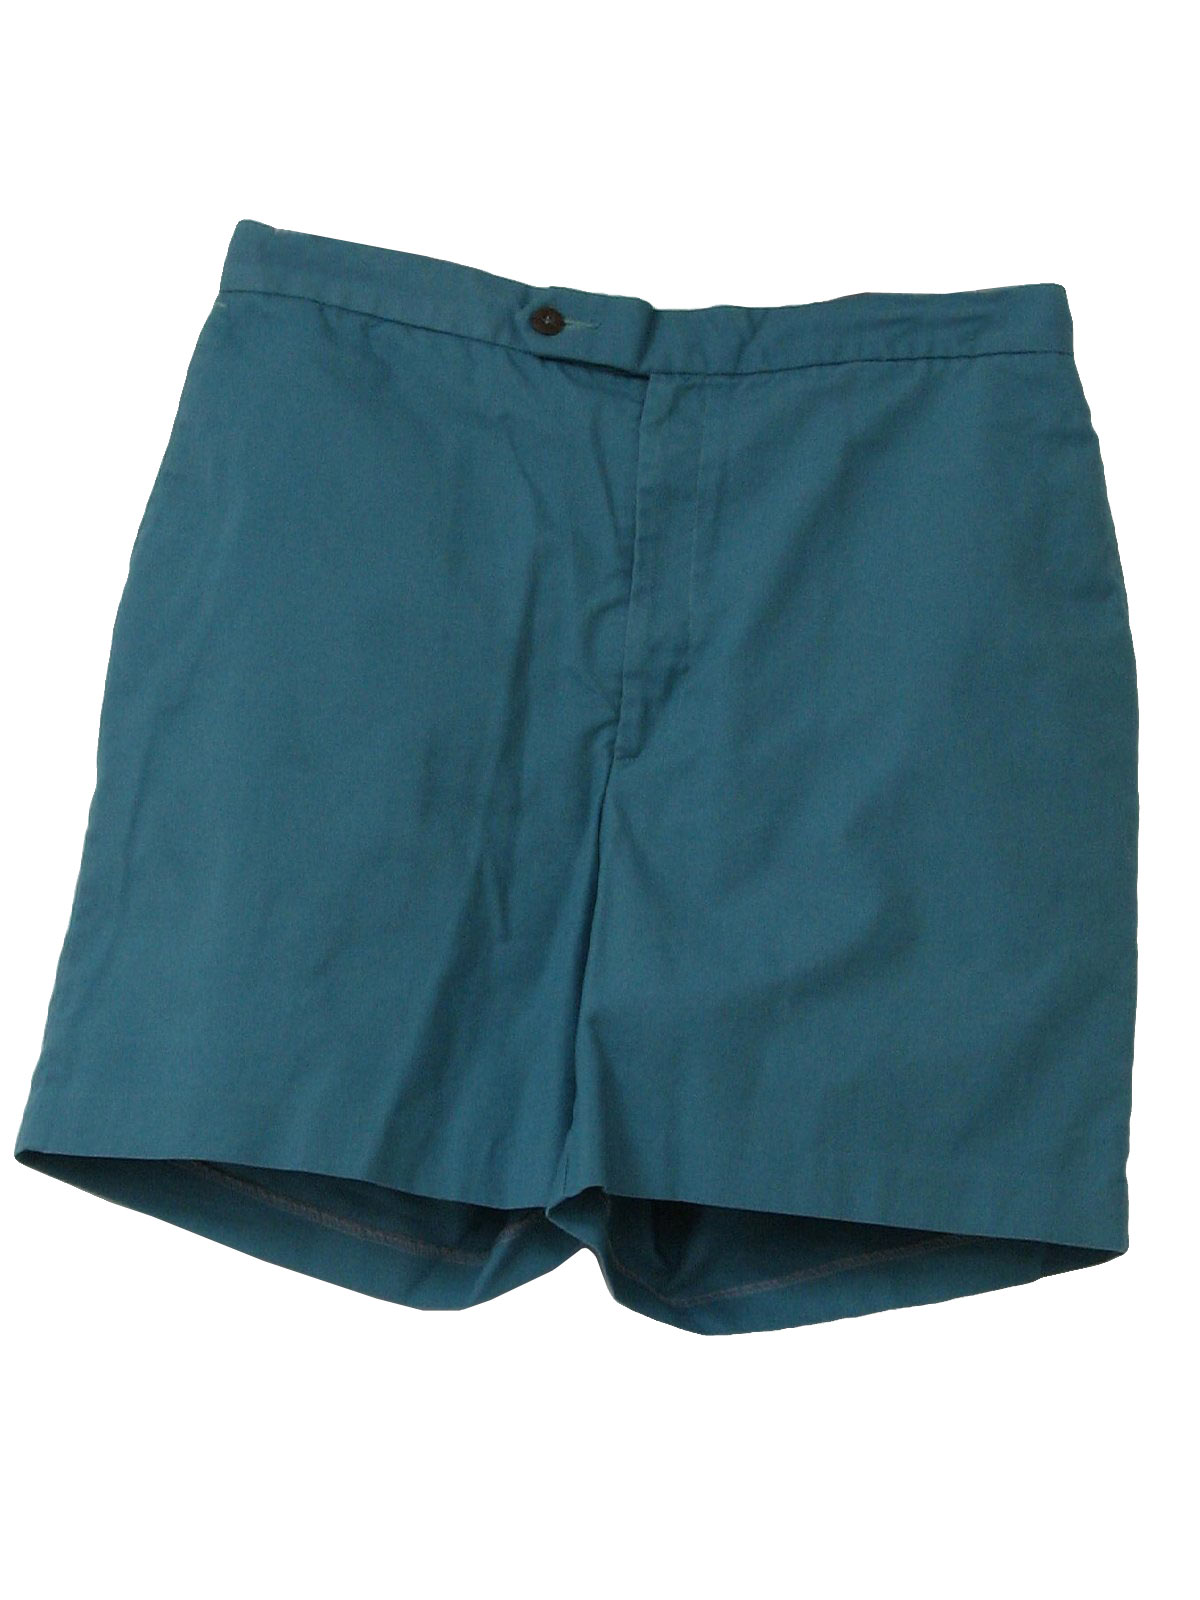 80's Vintage Shorts: 80s -Haggar Casual Wear- Mens sky blue cotton and ...